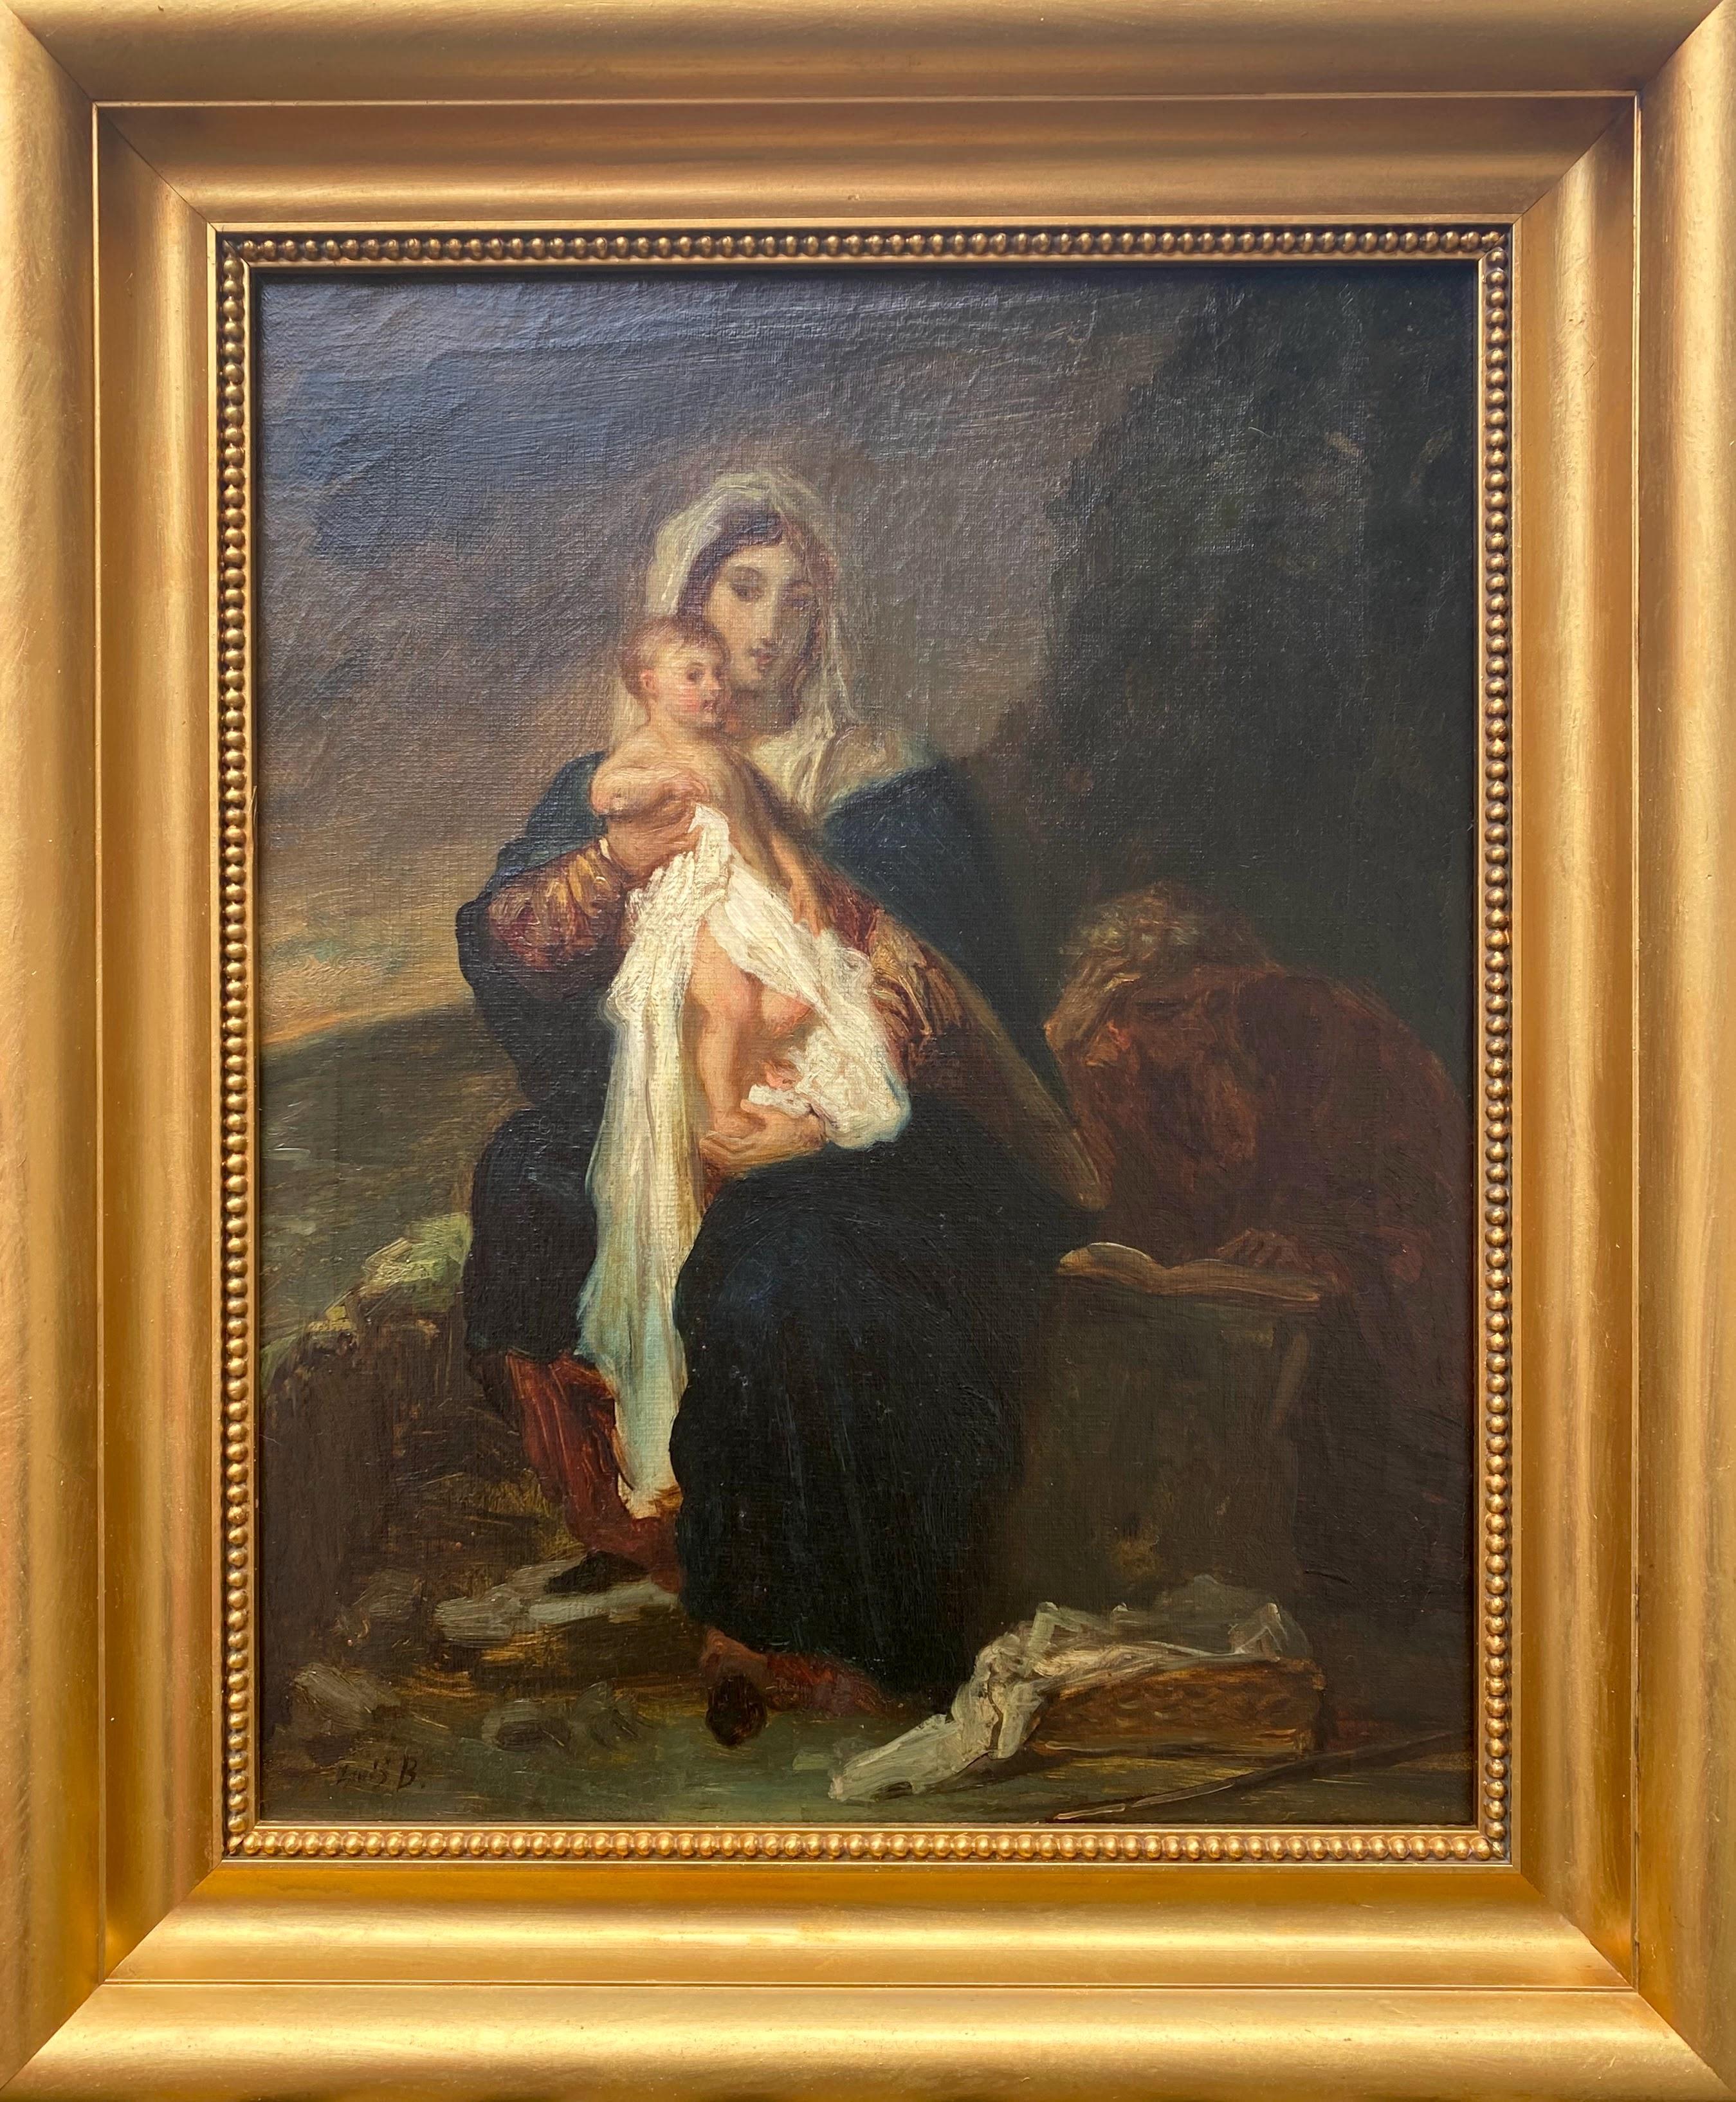 Circle of Delacroix: Mother and Child, Madonna by the Water - Painting by Eugene Delacroix